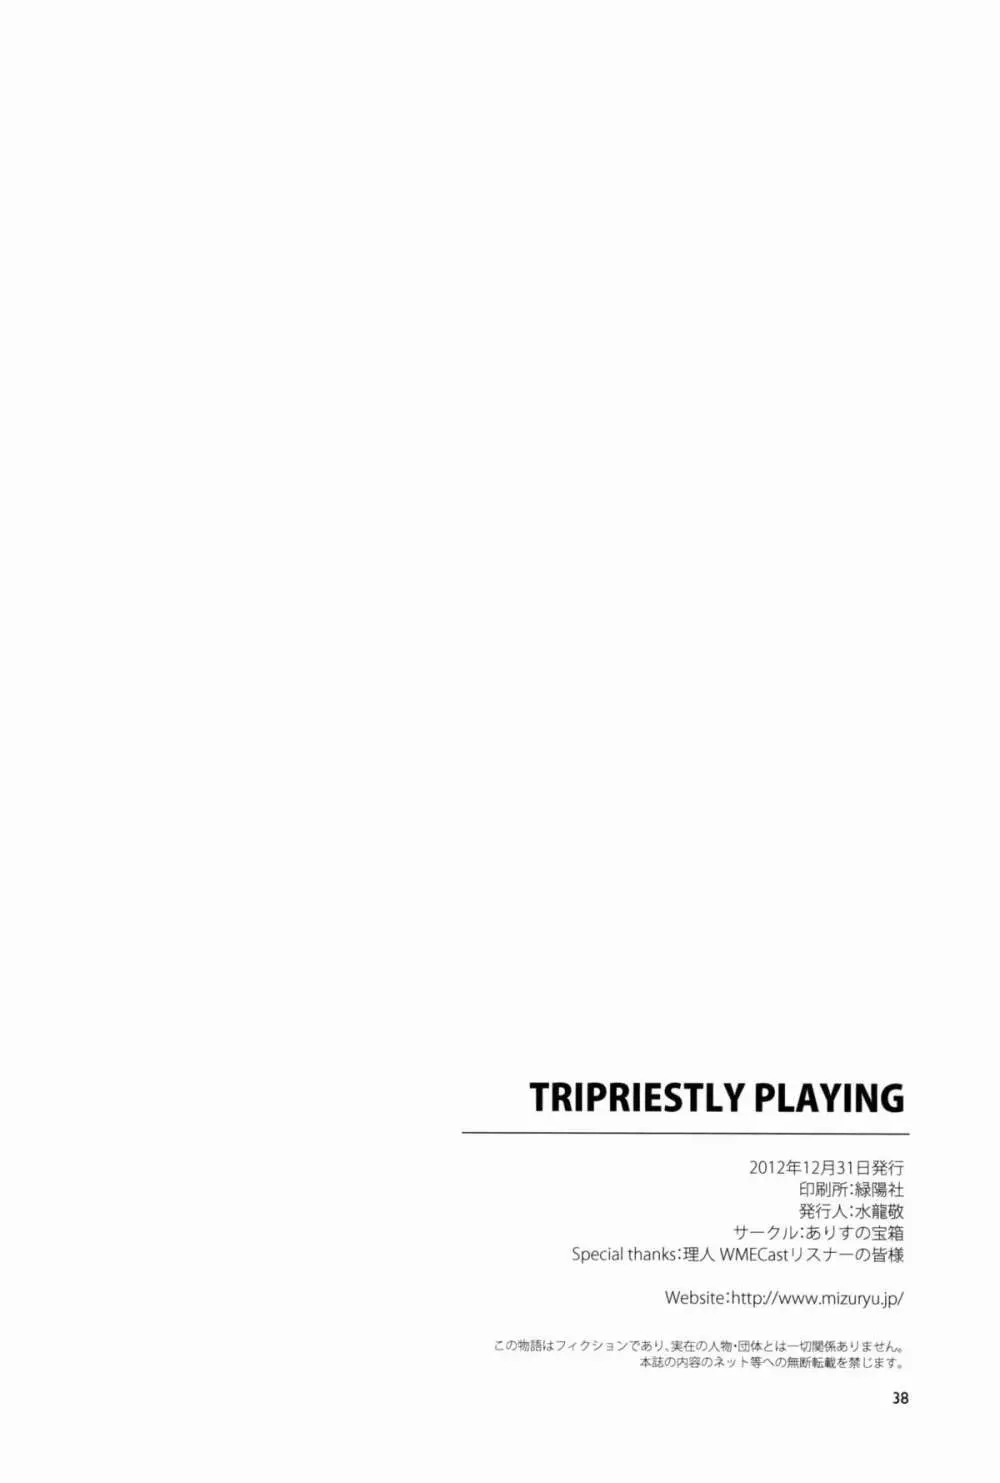 TRIPRIESTLY PLAYING 38ページ